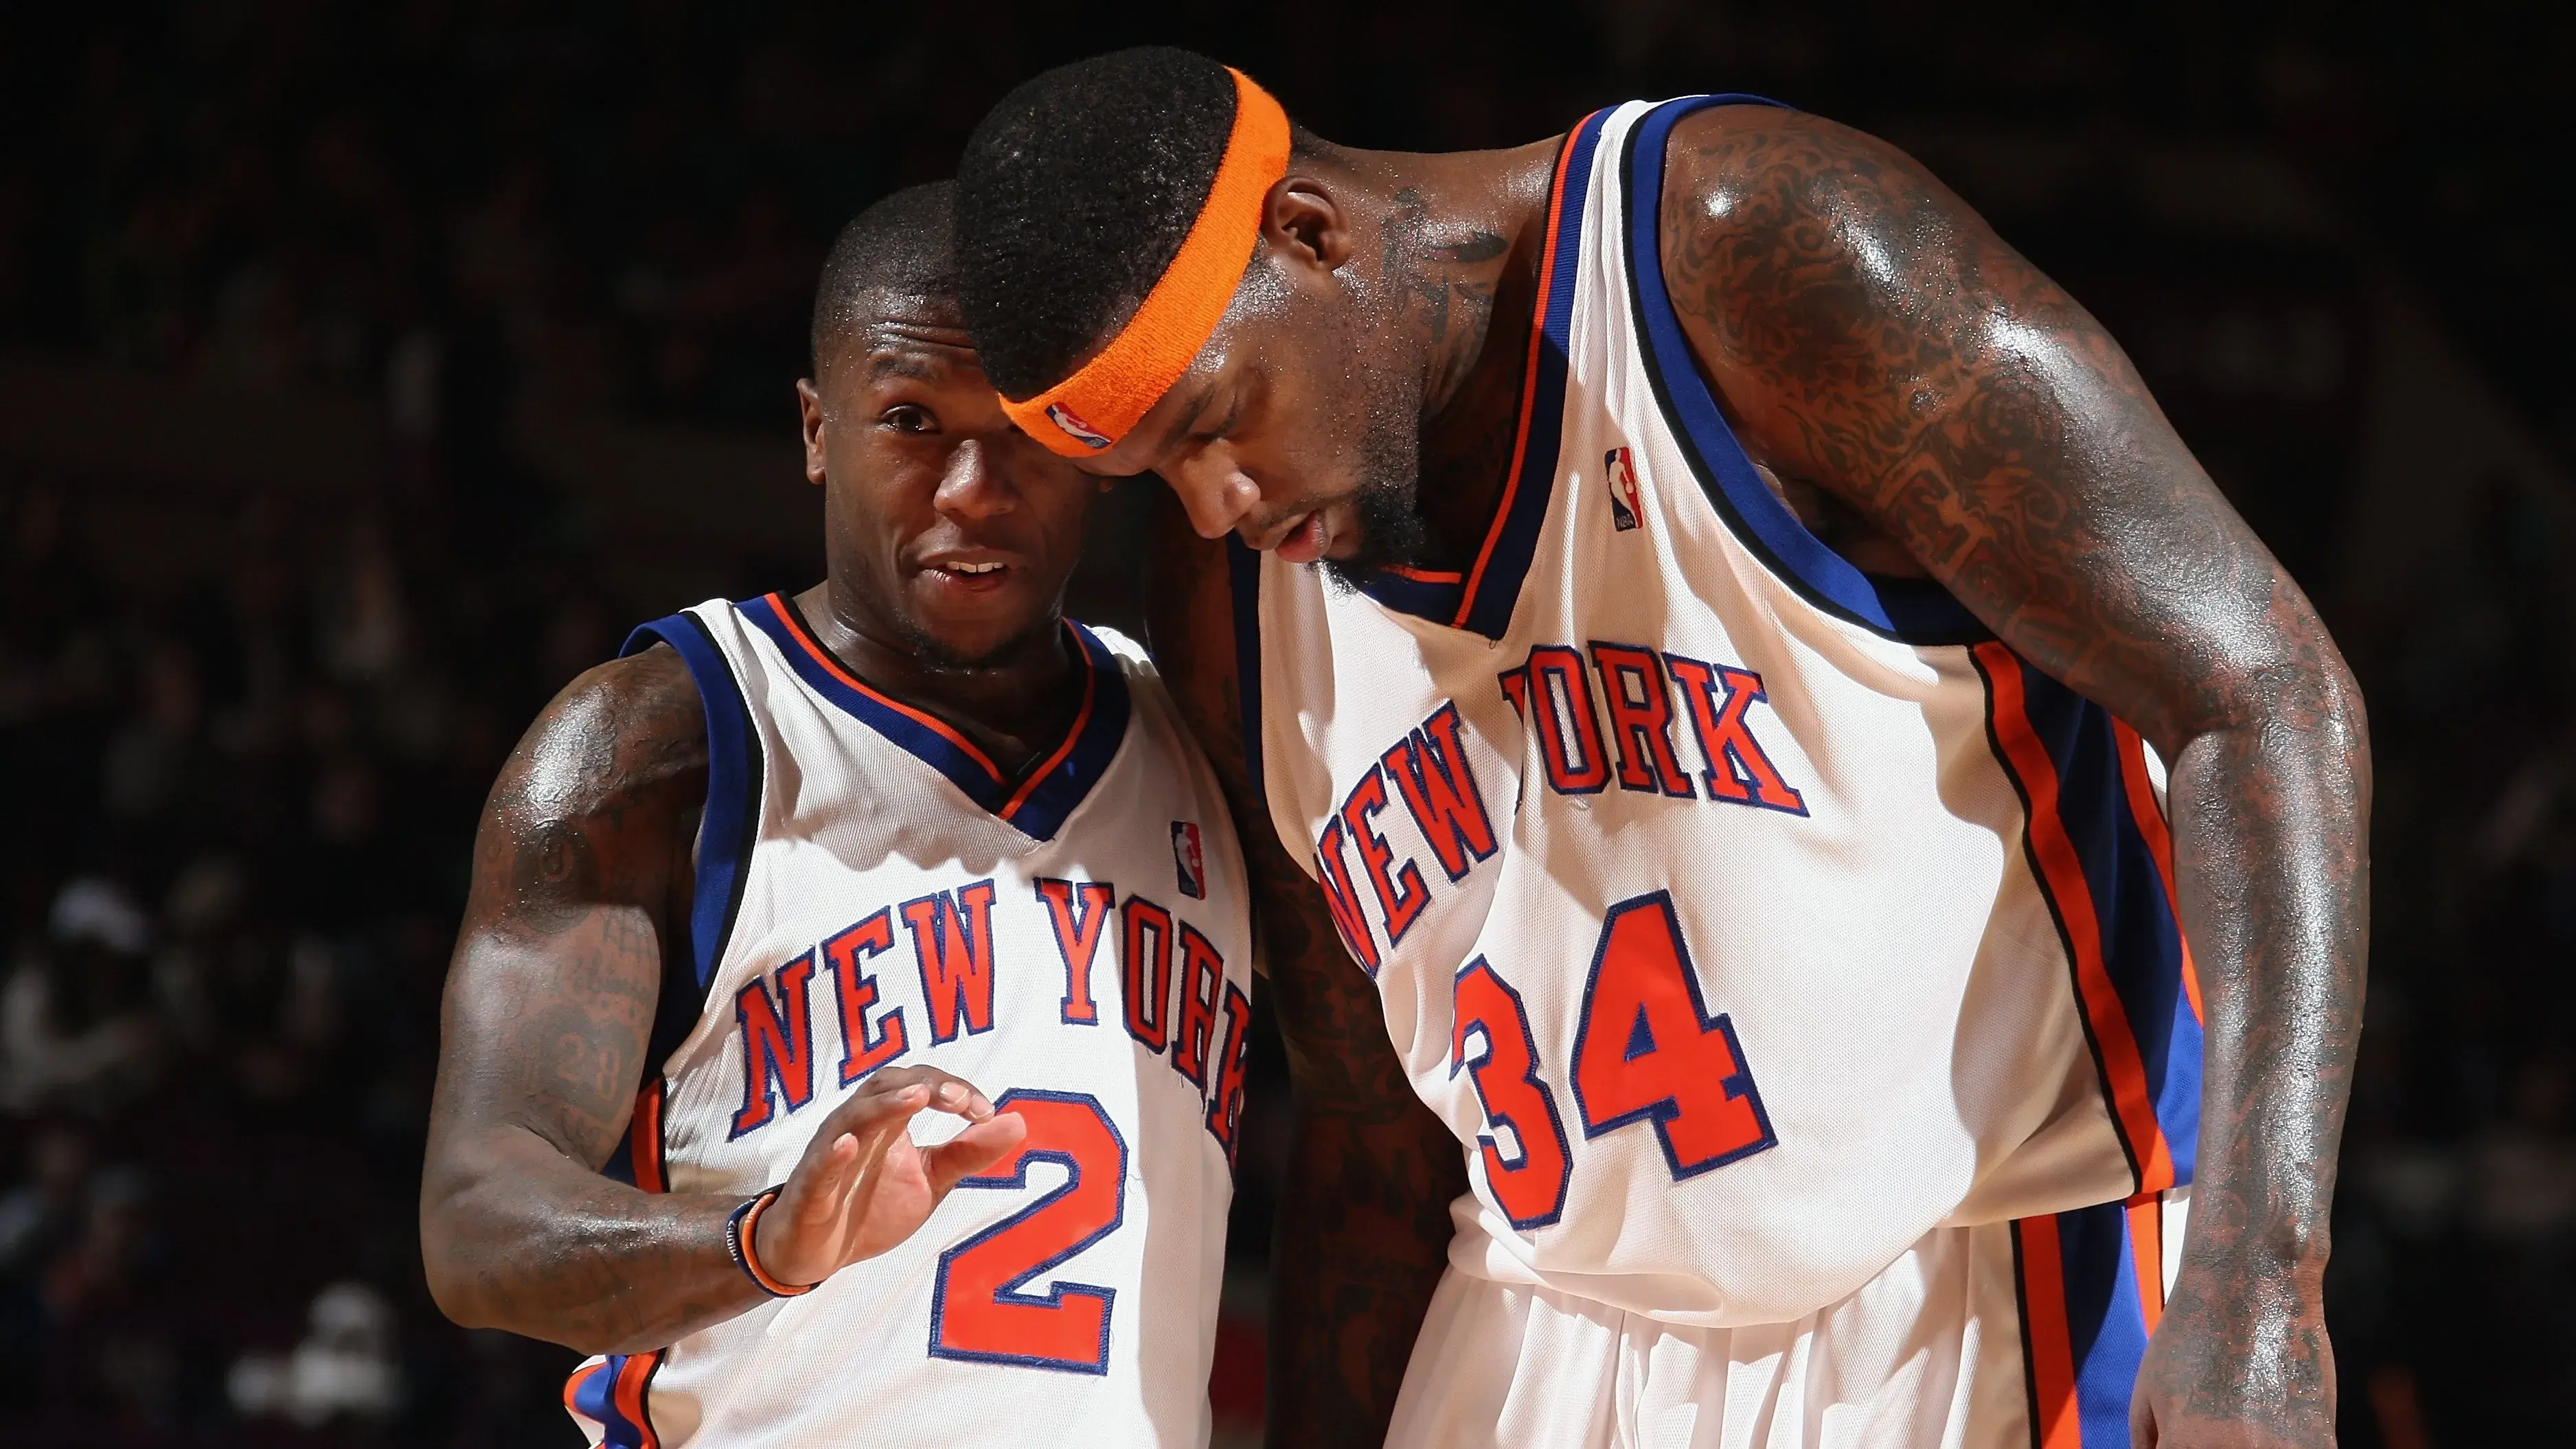 NEW YORK - NOVEMBER 22: Nate Robinson #2 and Eddy Curry #34 of the New York Knicks talk on the court during the game against the Boston Celtics on November 22, 2009 at Madison Square Garden in New York City. The Celtics won 107-105. / Nathaniel S. Butler/NBAE via Getty Images